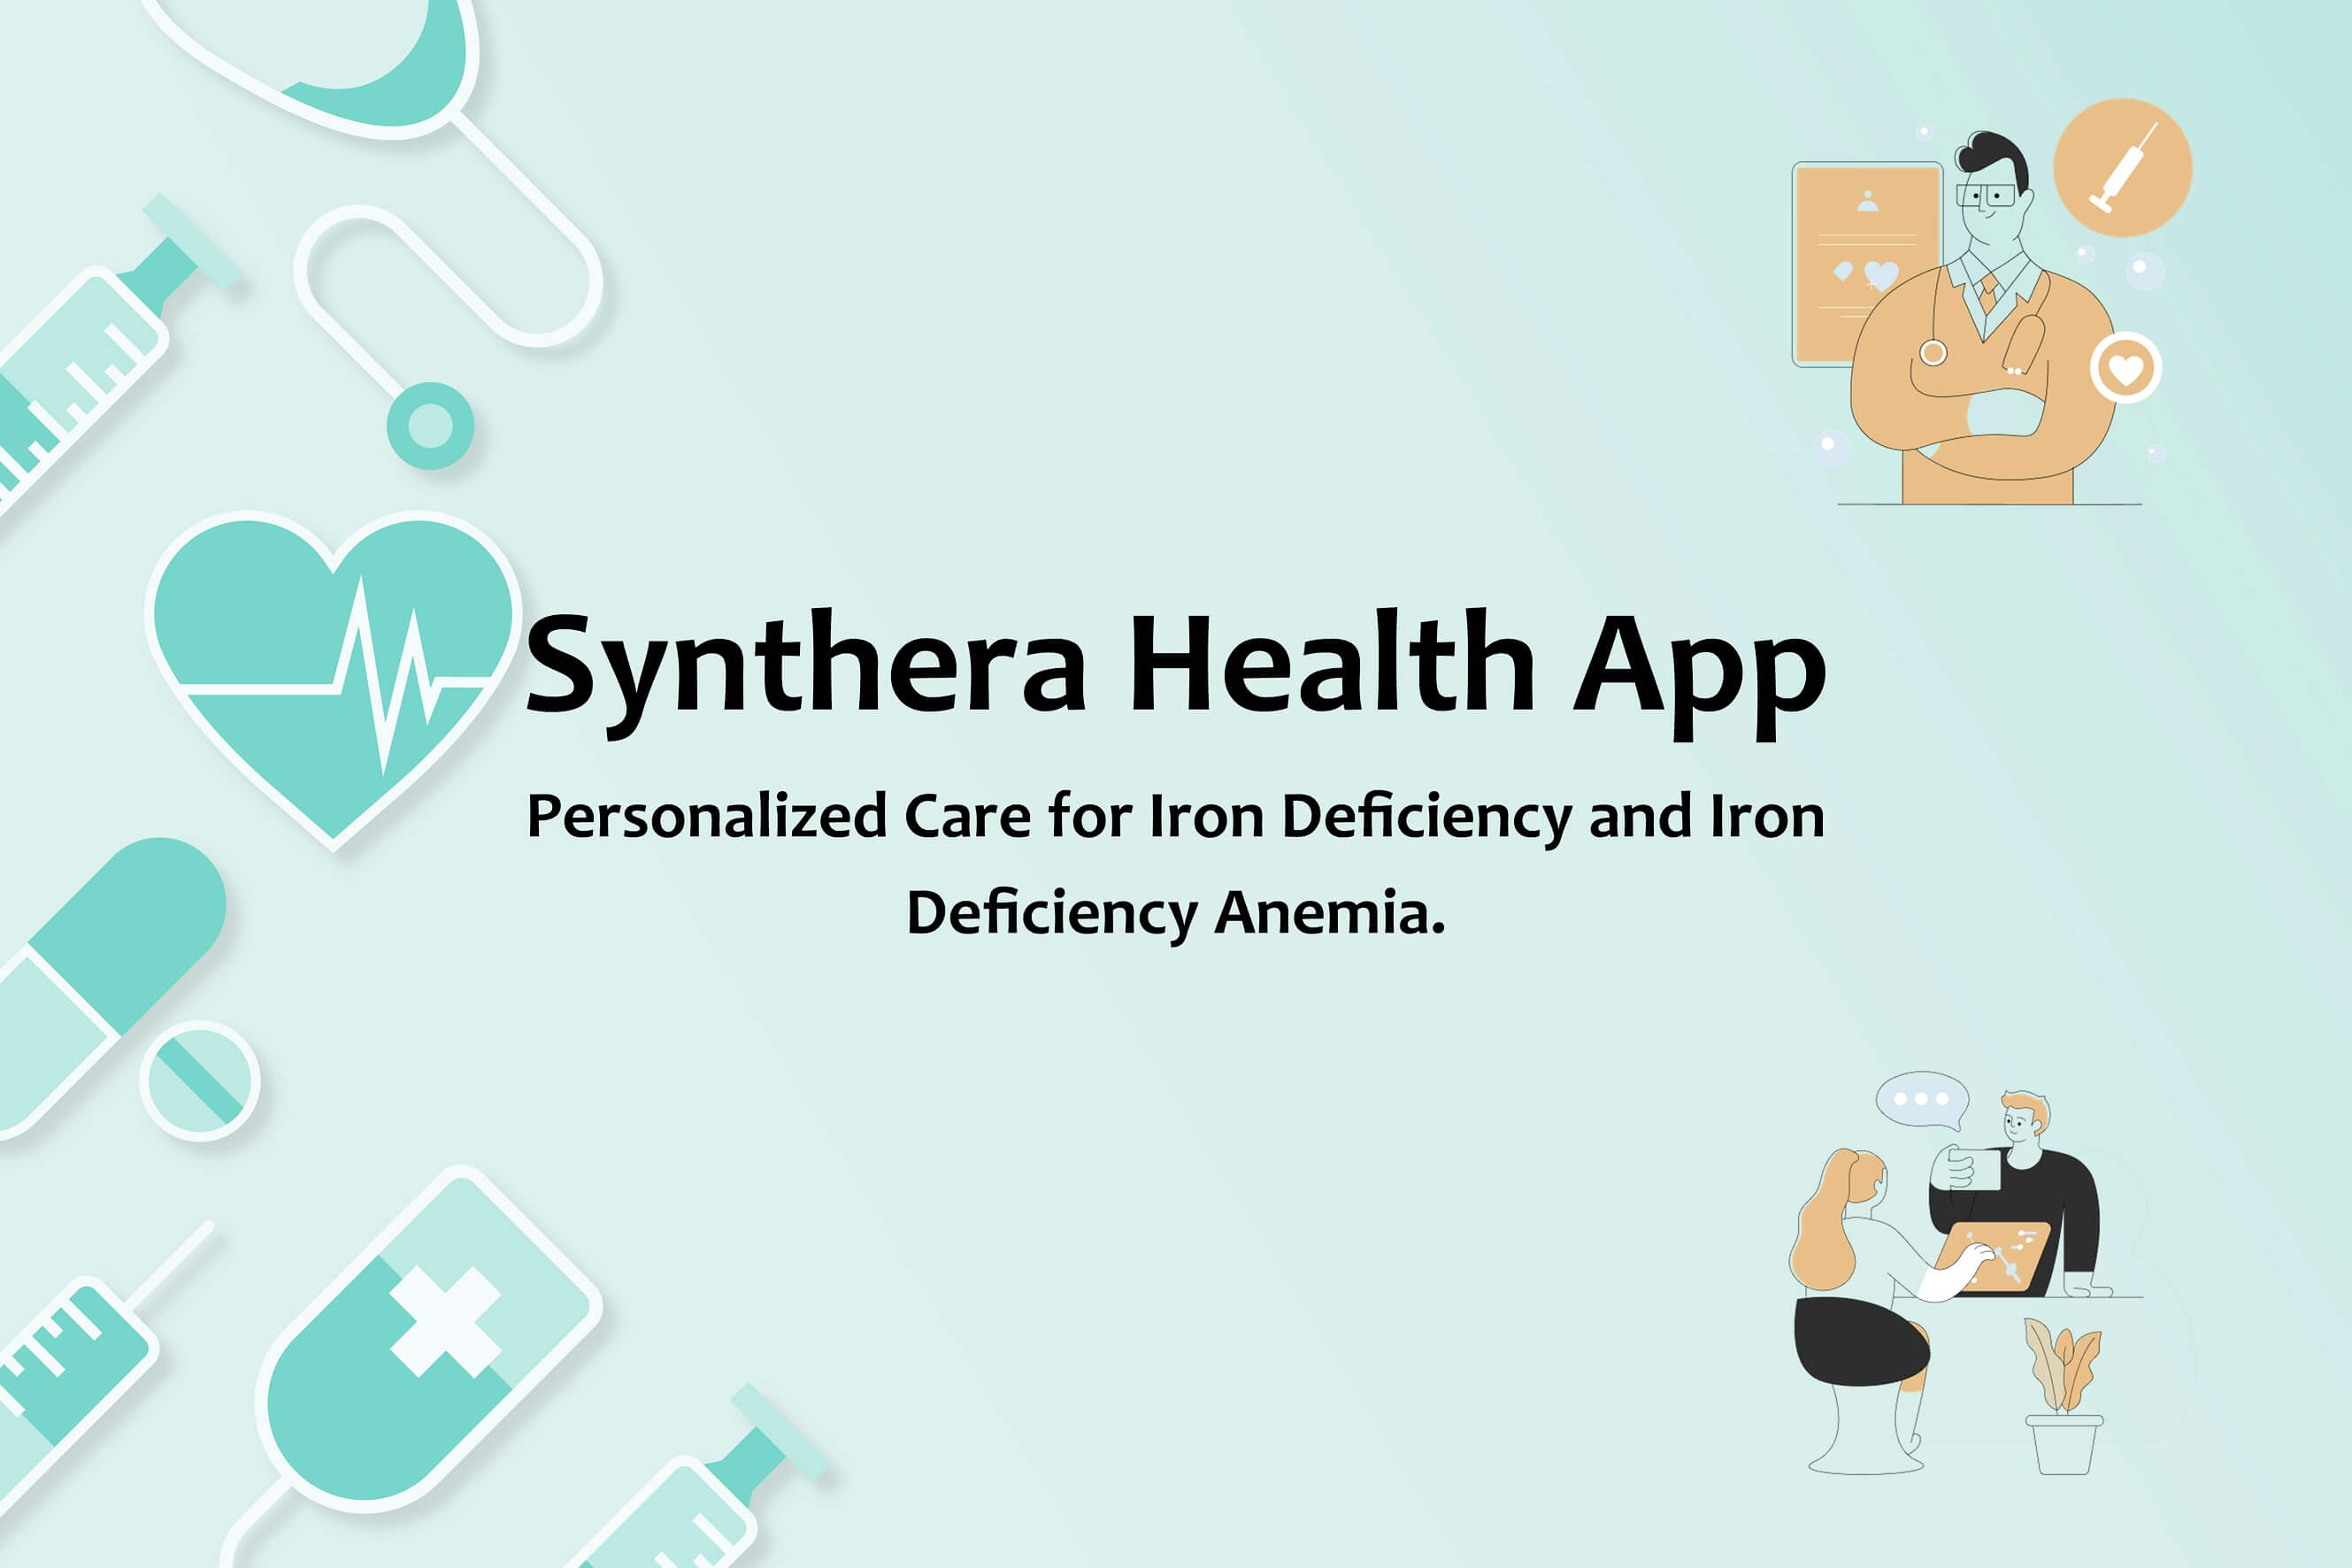 Personalized care for Iron Deficiency and Iron Deficiency Anemia